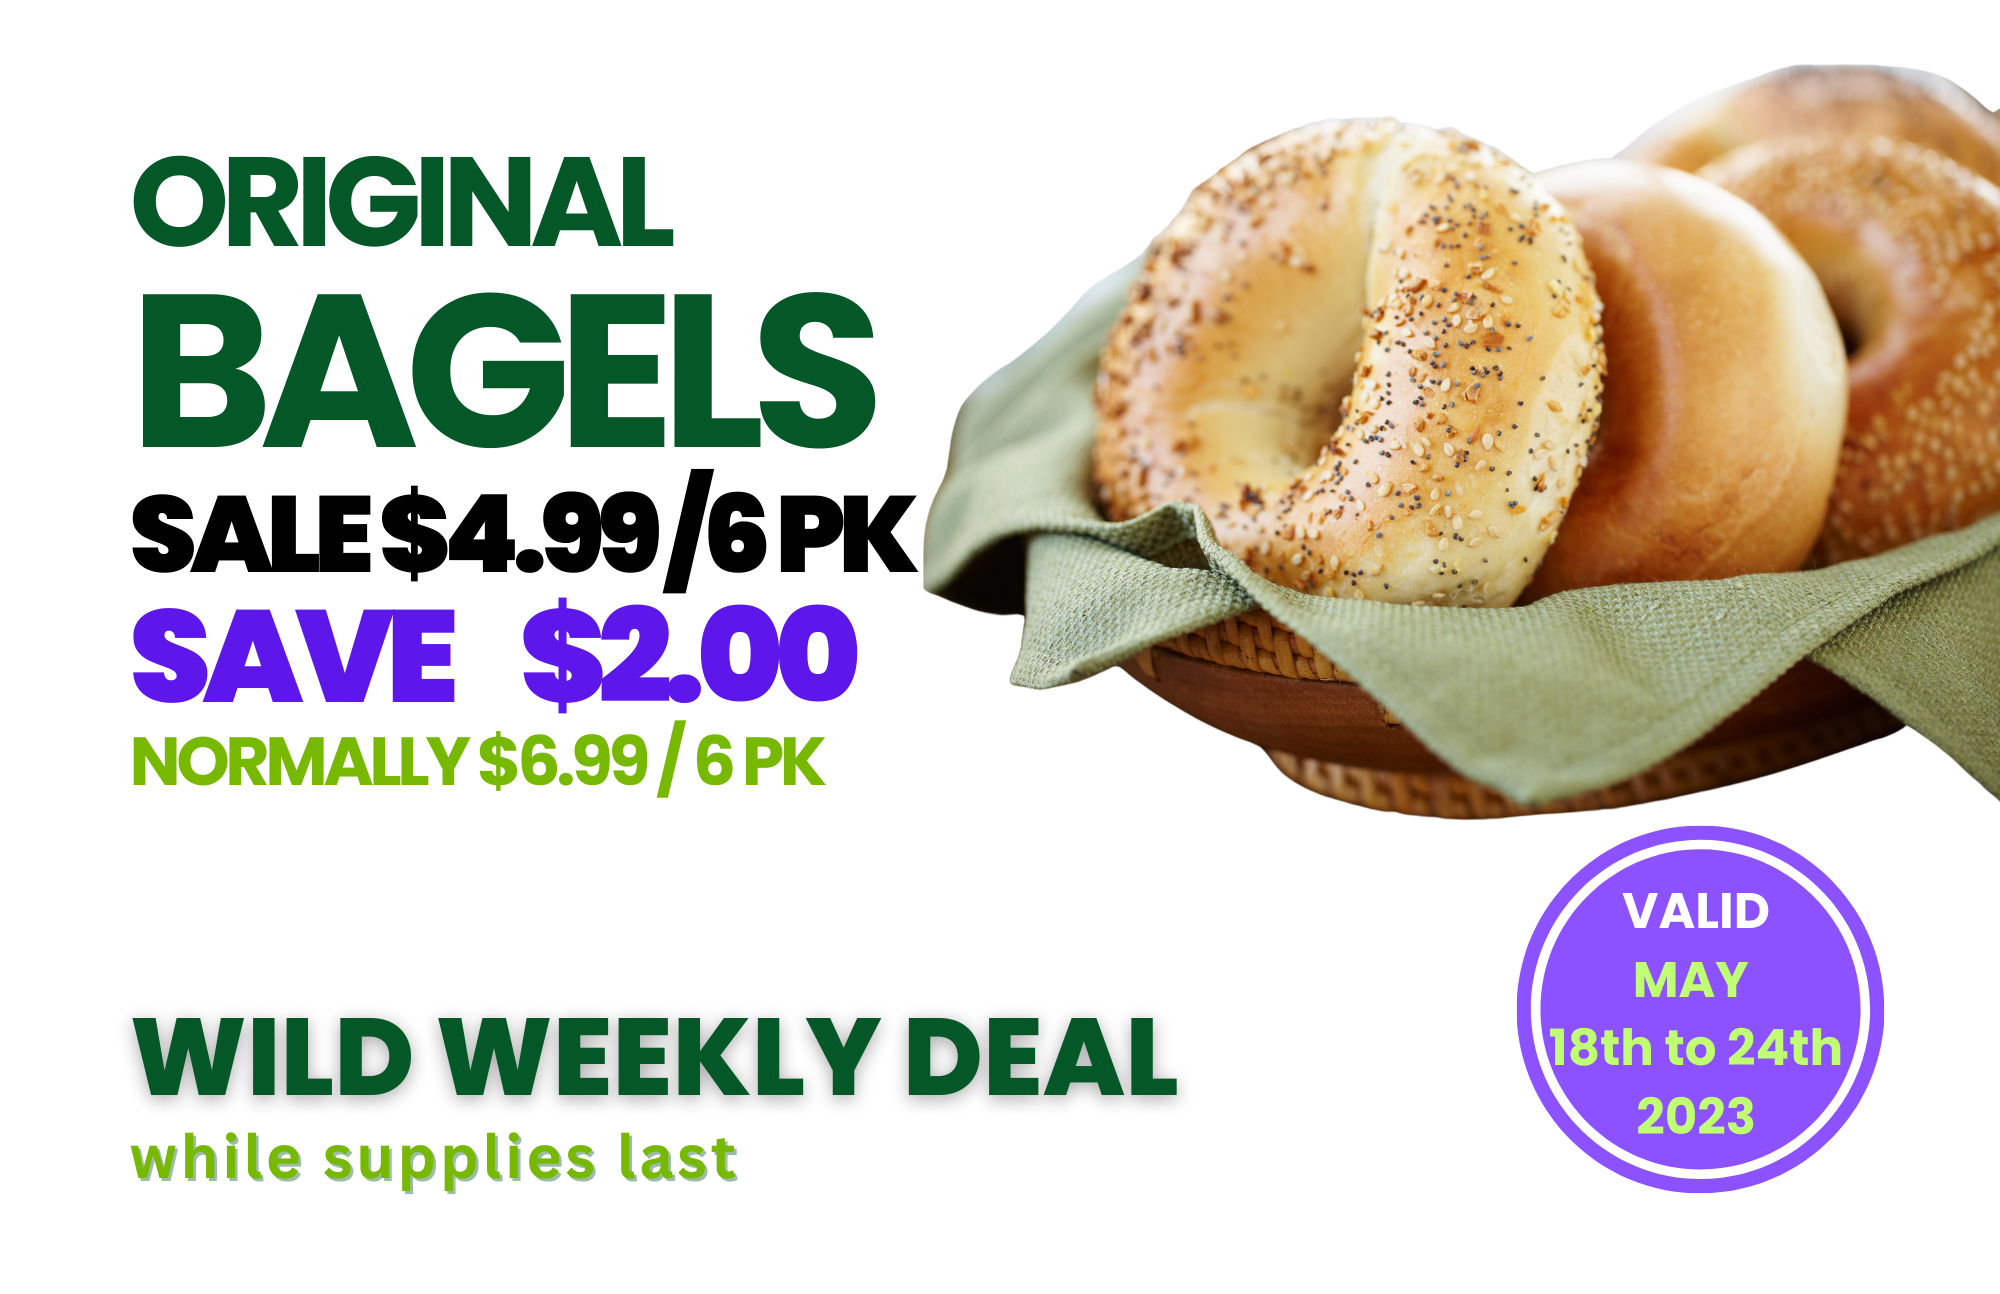 Wild Oats Market Williamstown MA Weekly Deals May 18-24 2023 Original Bagel.png